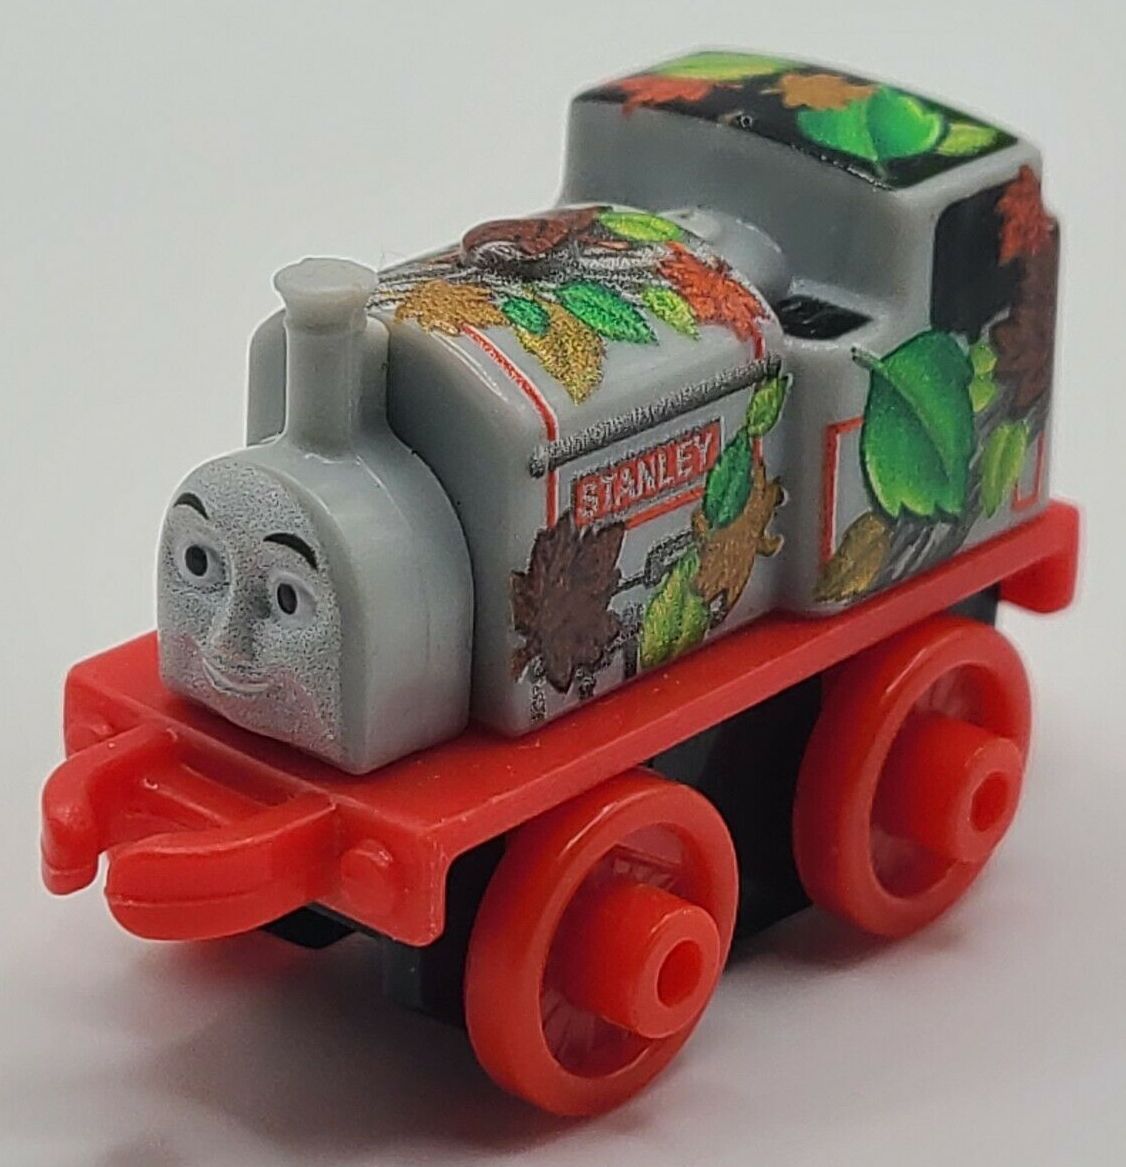 https://static.wikia.nocookie.net/thomasminis/images/0/01/Camo_Stanley.jpg/revision/latest?cb=20220214131346